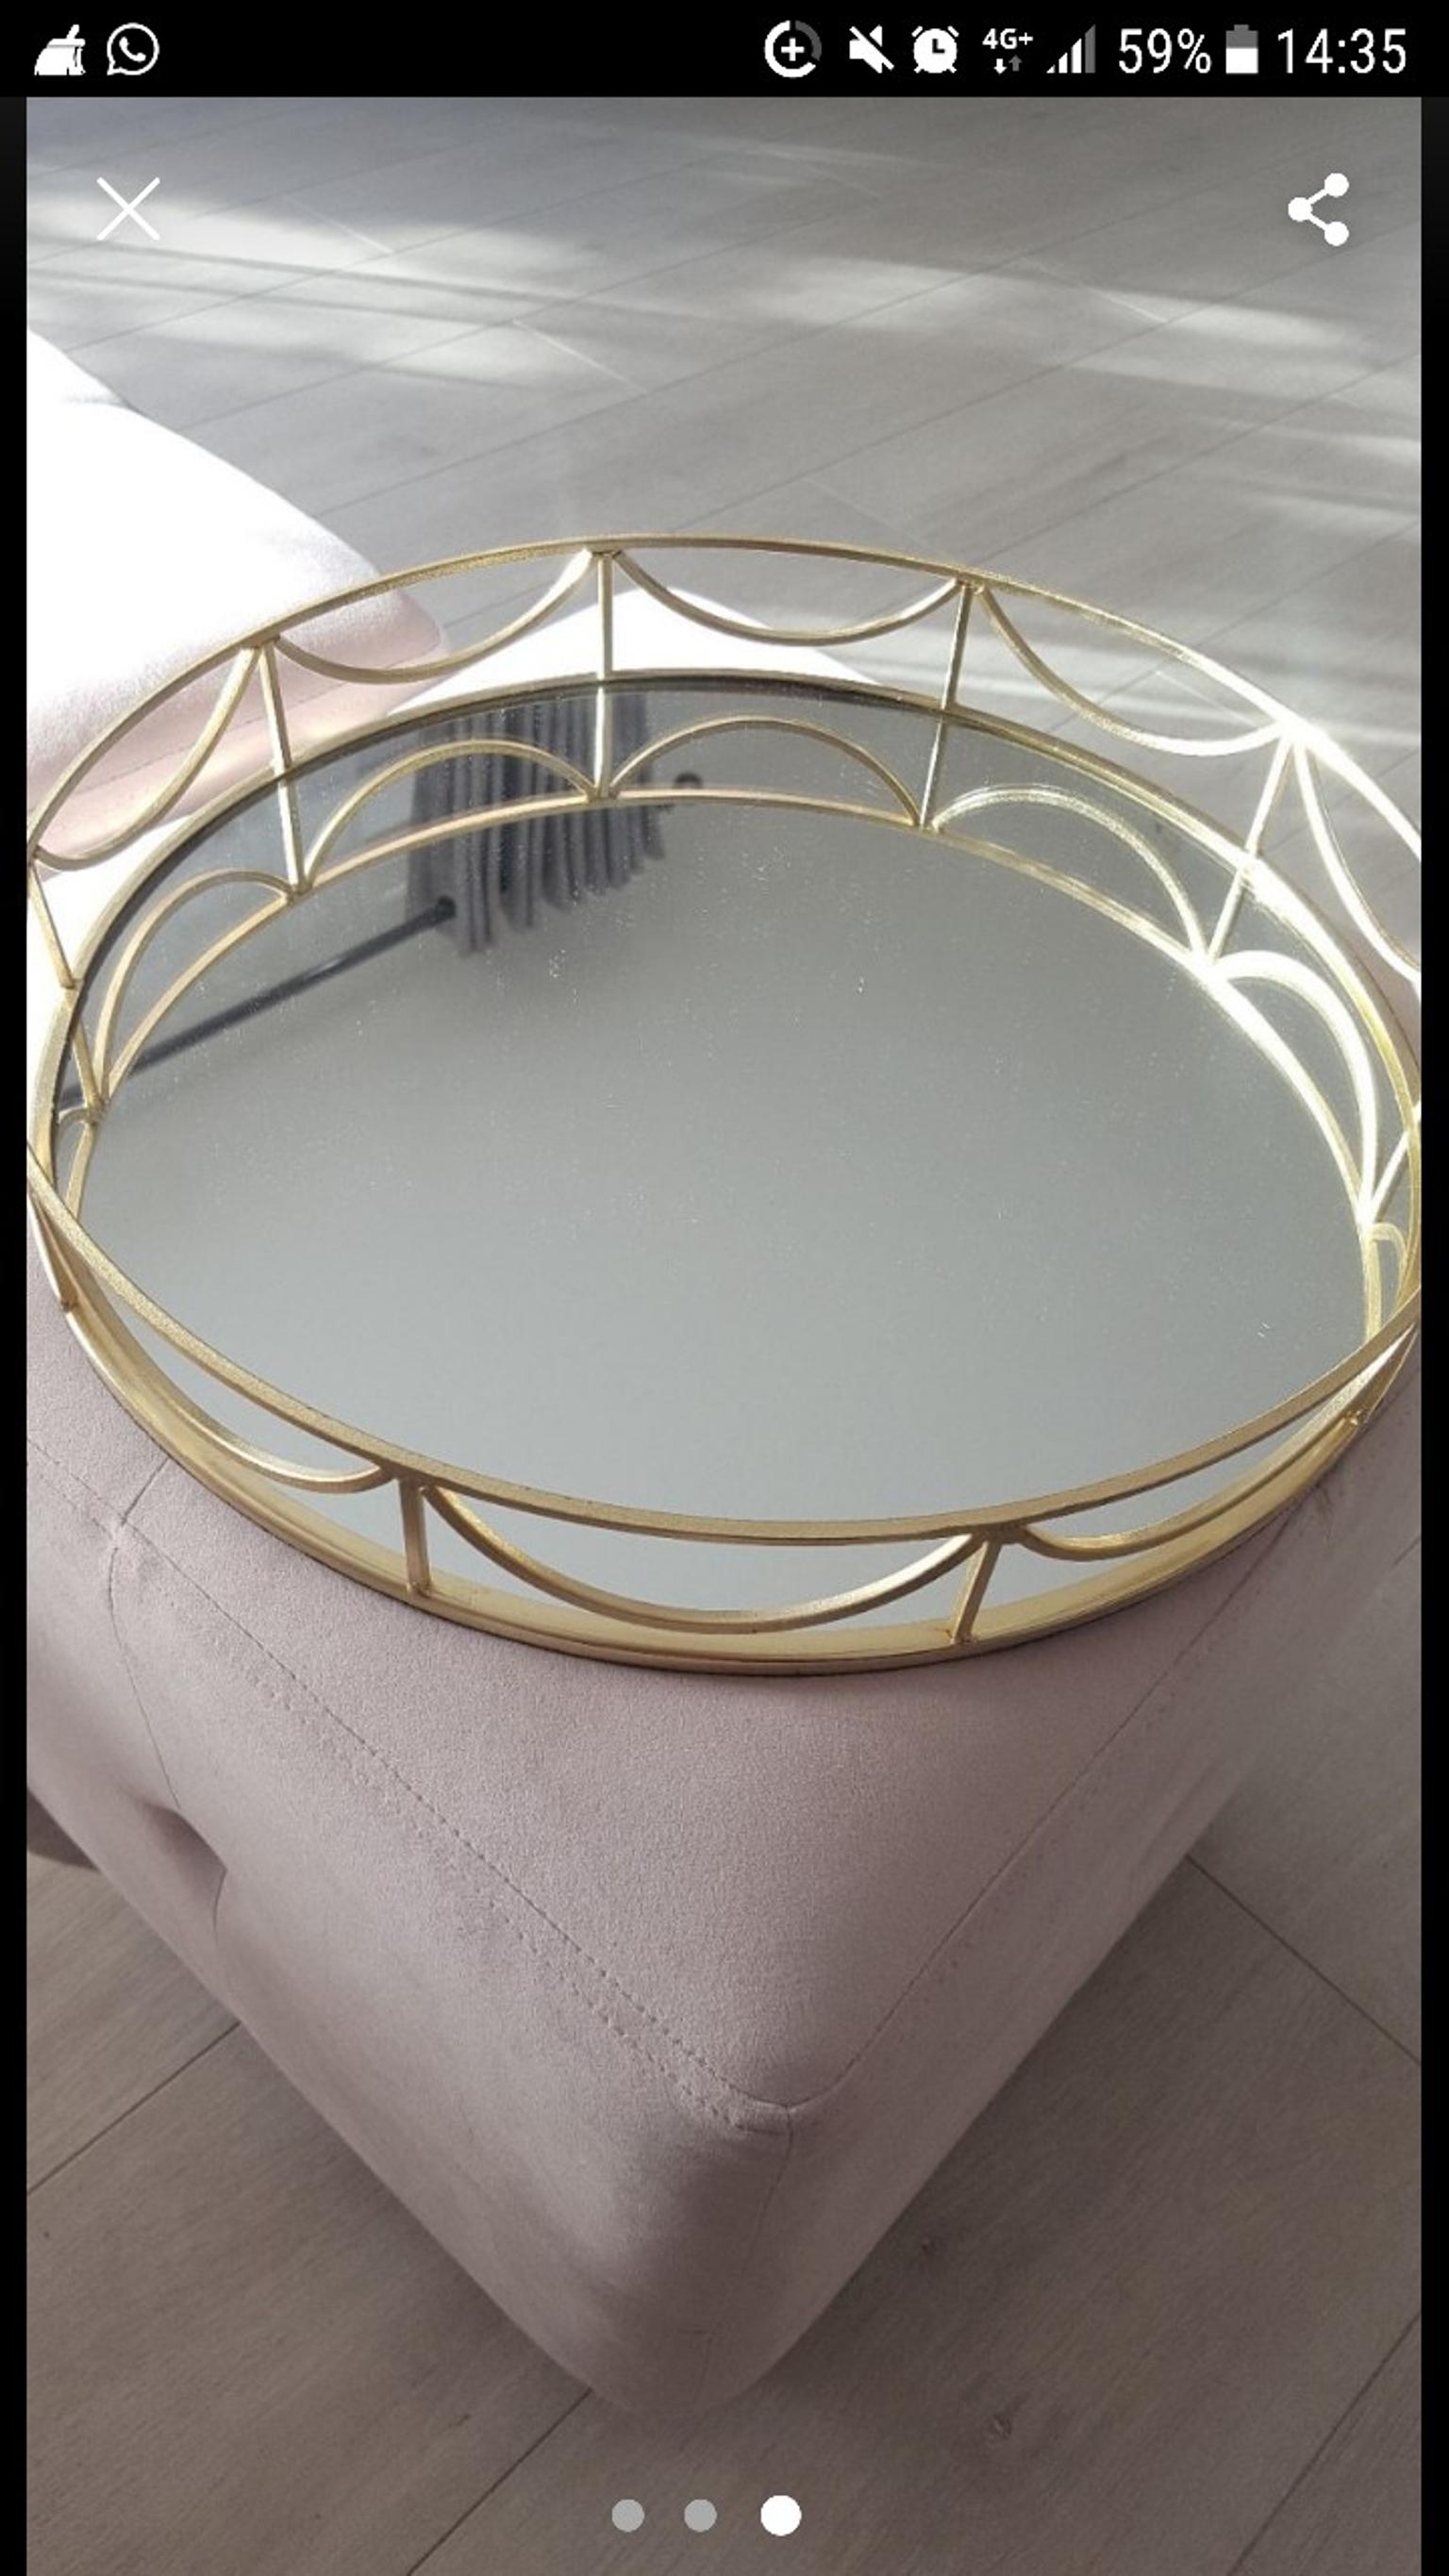 Large Gold Mirror Tray In E6 Newham For, Extra Large Gold Mirrored Tray